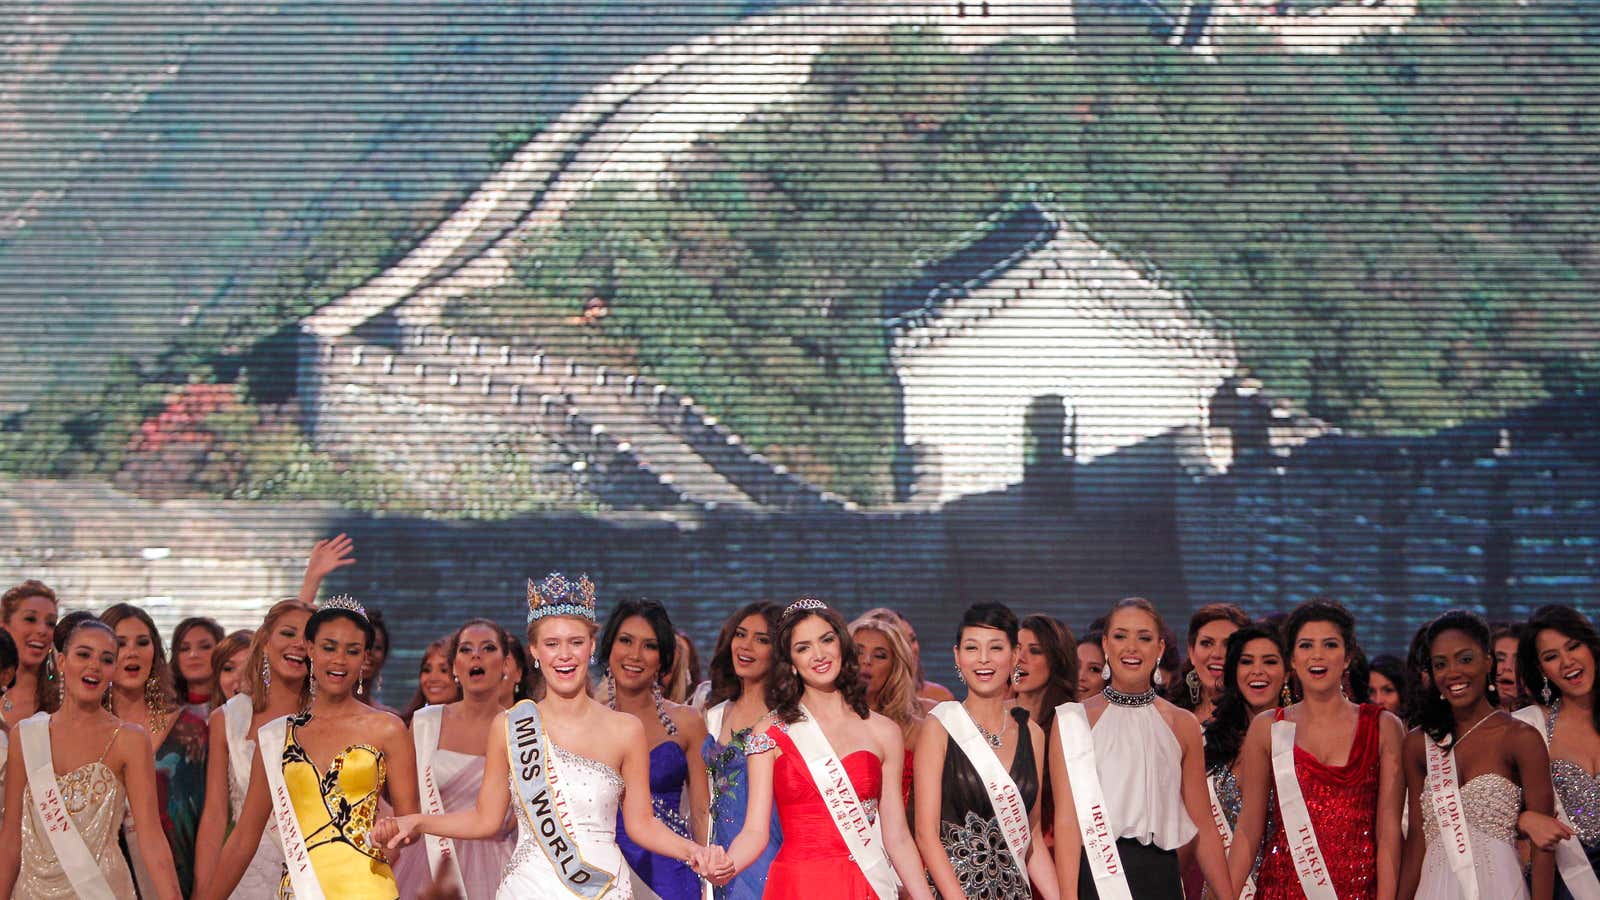 Miss World contestants in front of a screen showing the Great Wall in 2010.